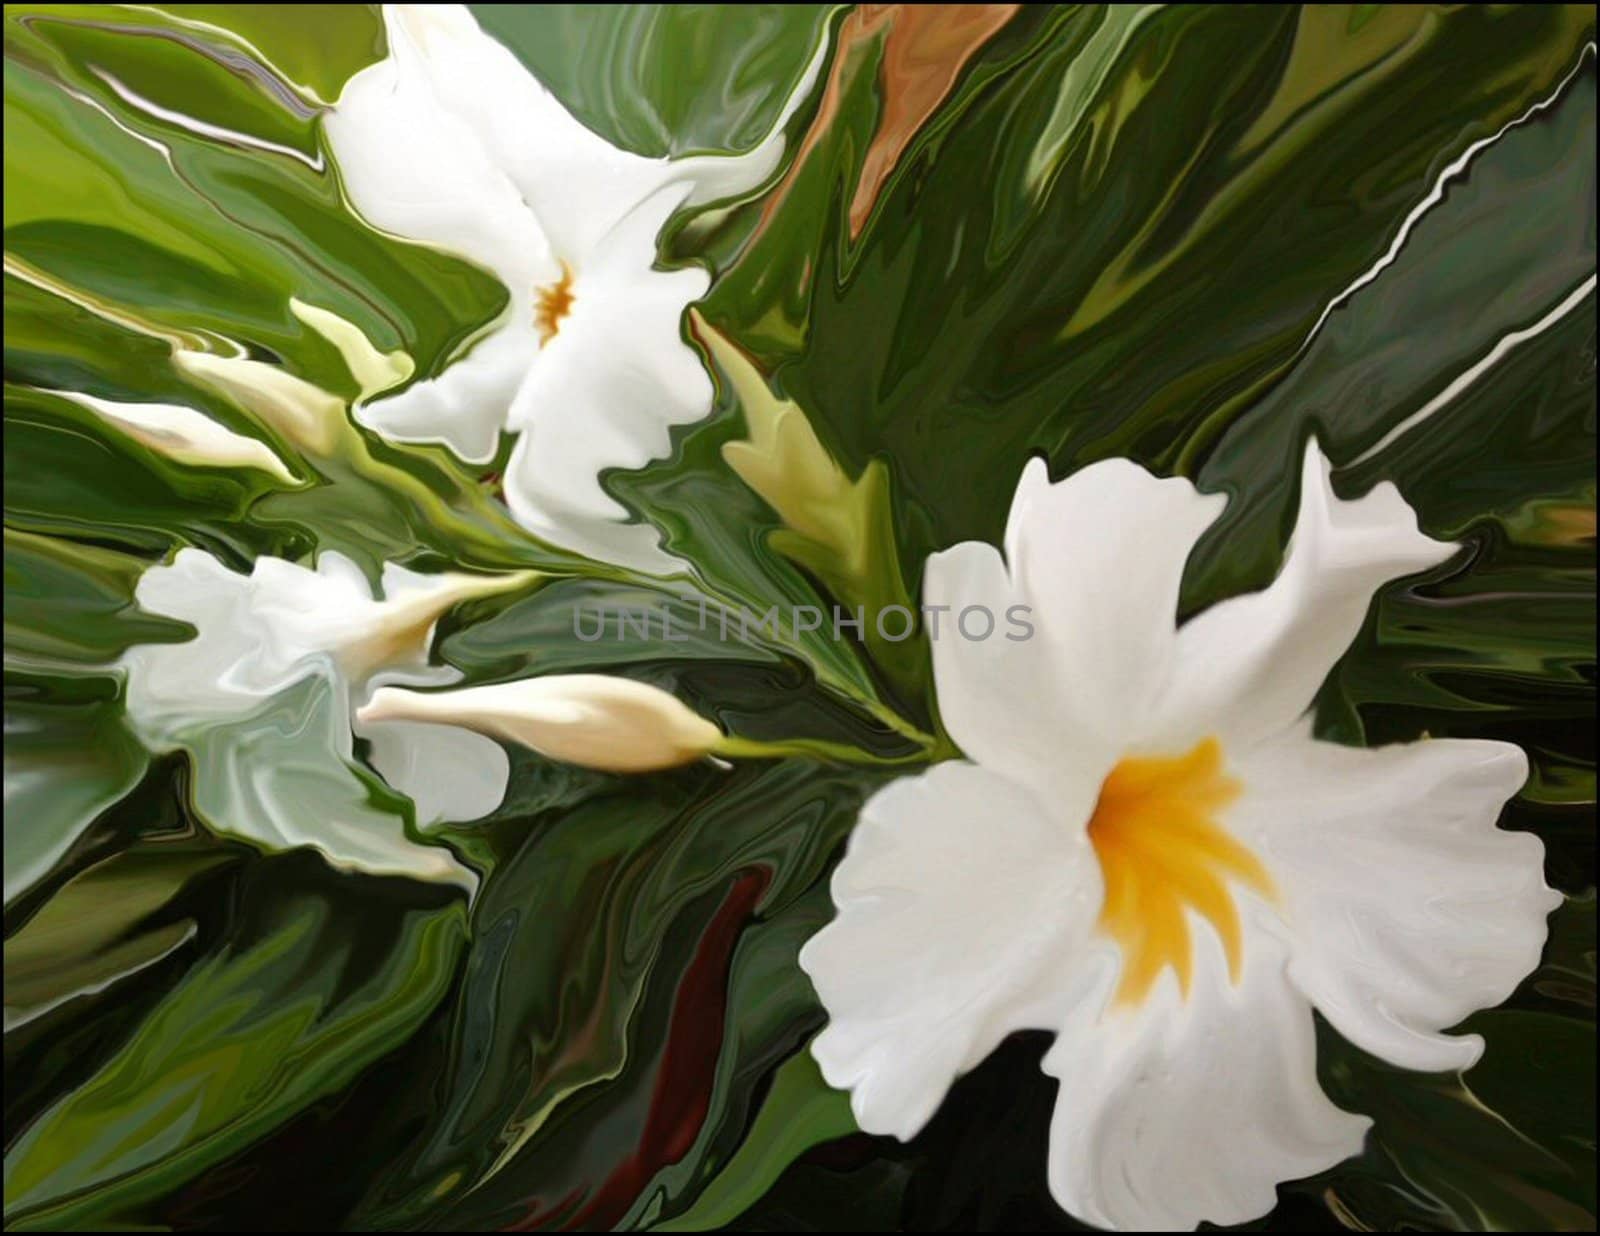 Surreal image of a bouquet of white Jasmine flowers.